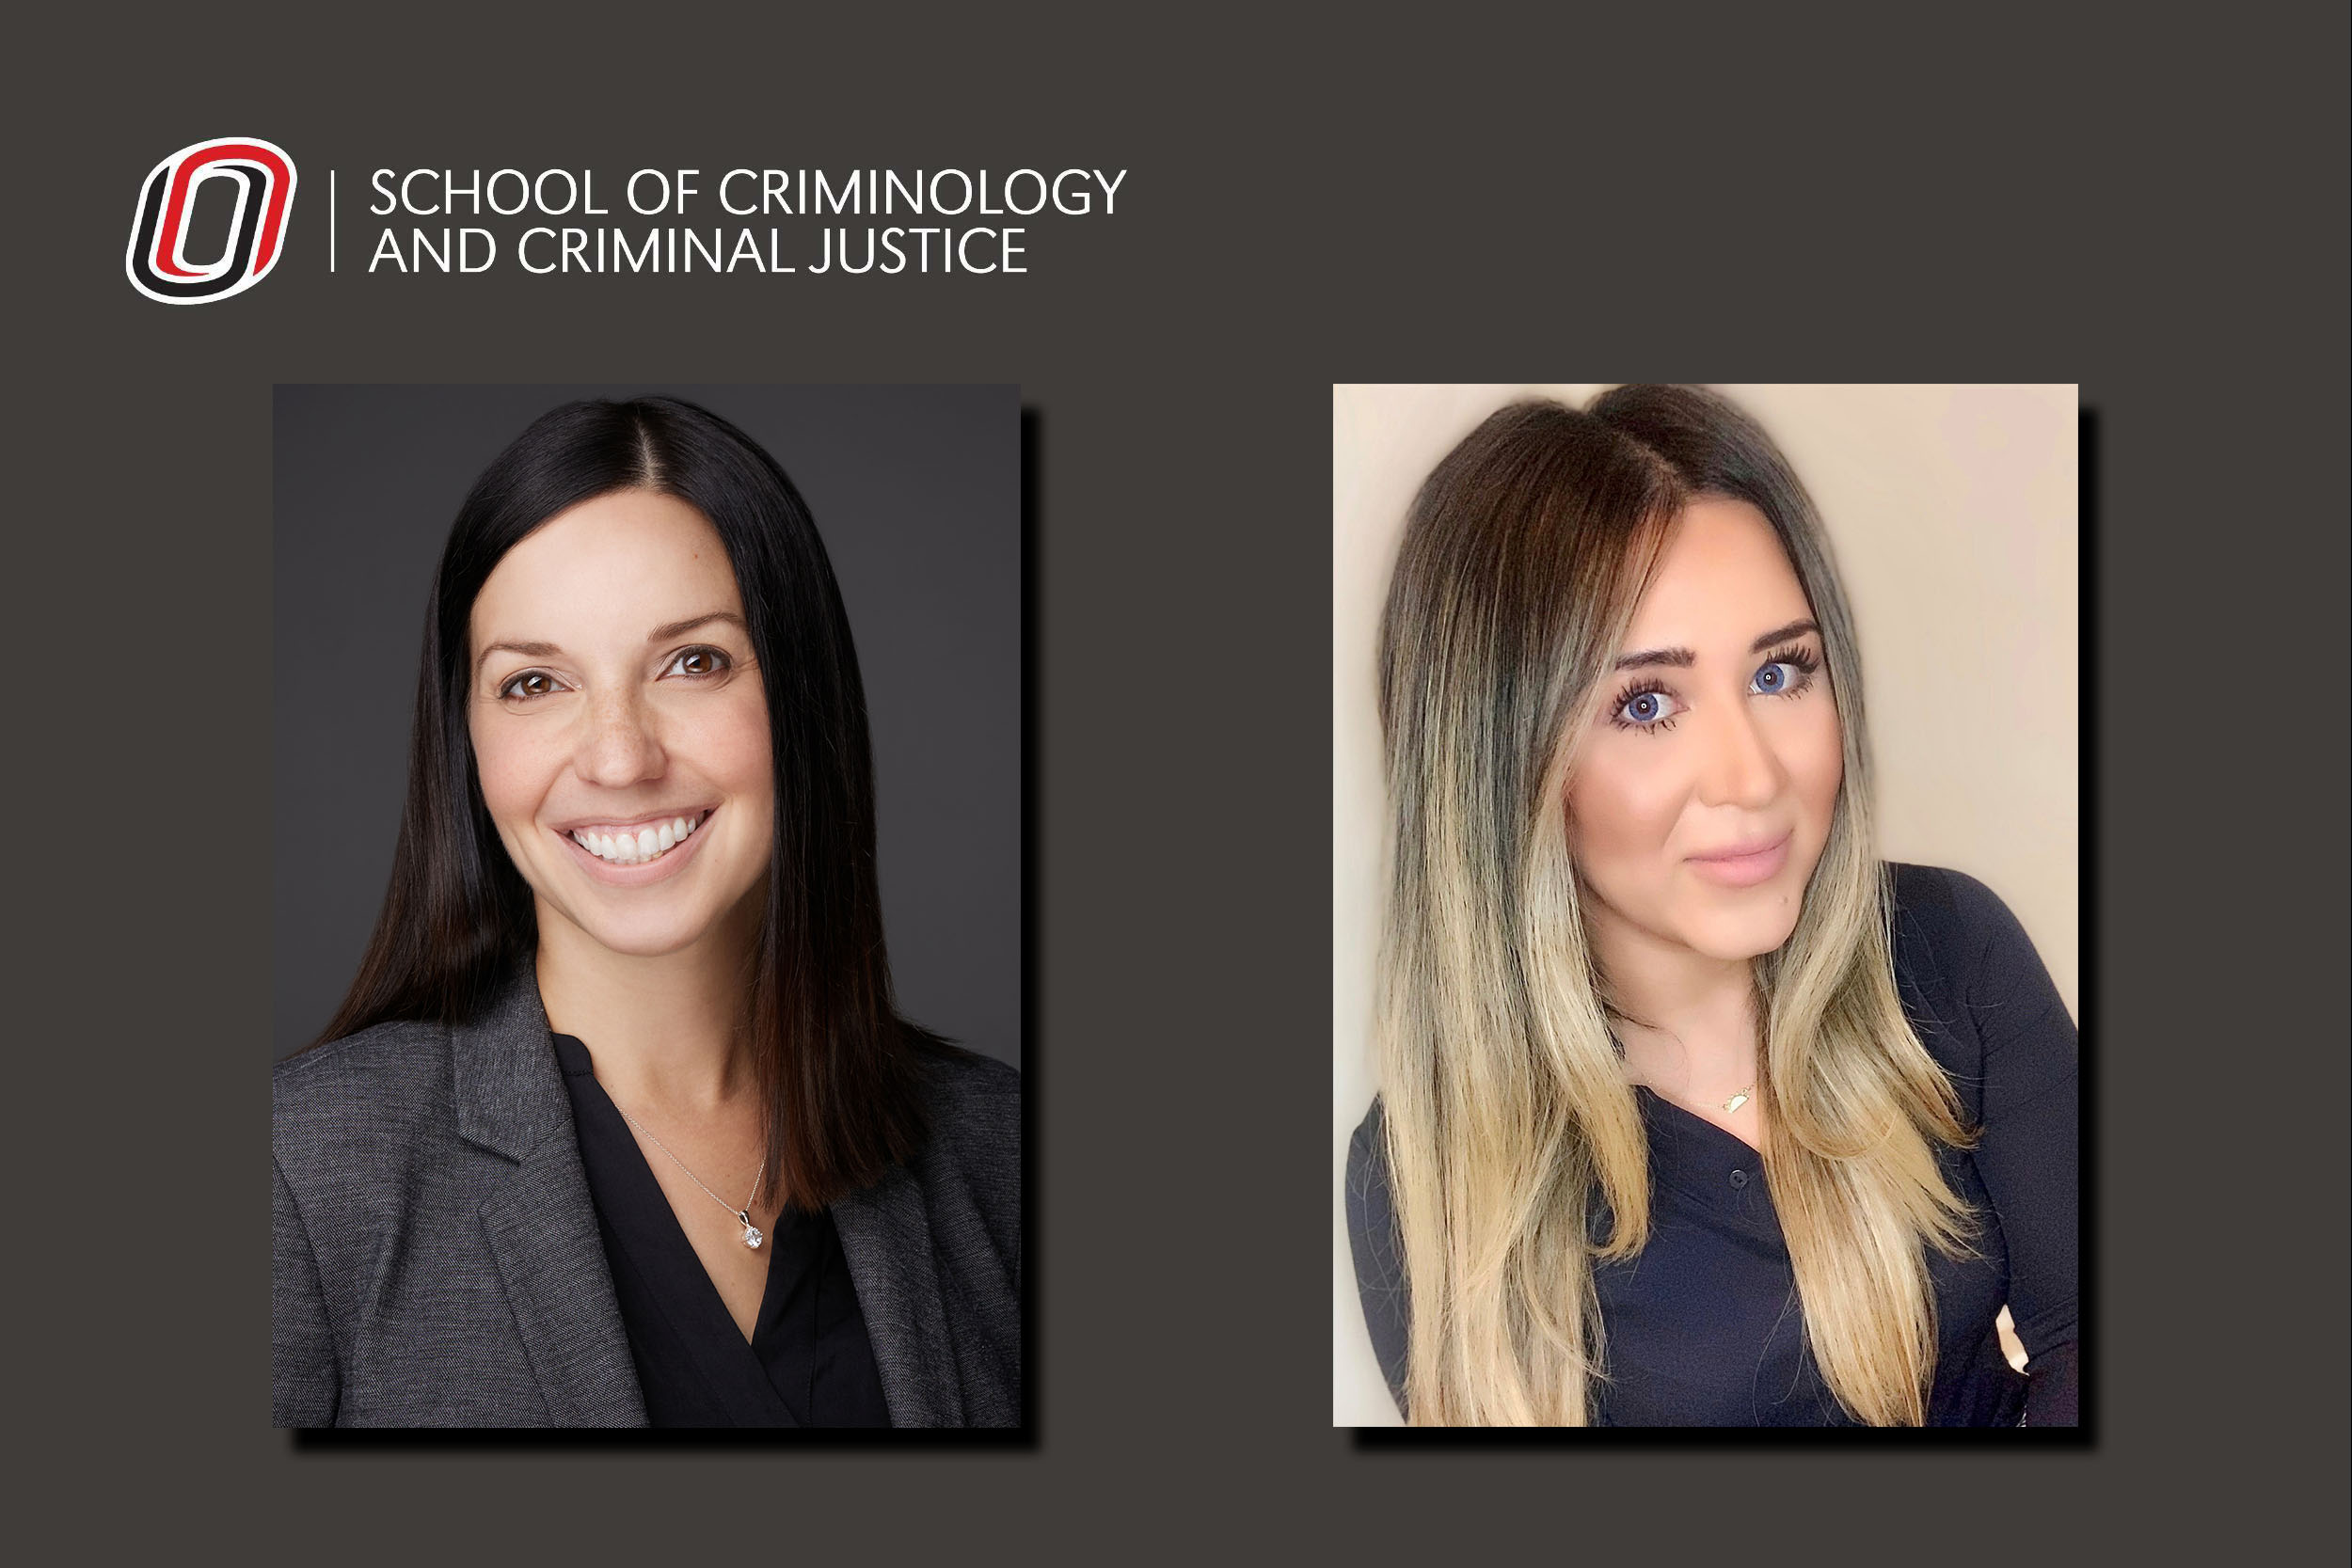 Teresa Kulig, Ph.D., (left) and Sadaf Hashimi, Ph.D., (right), assistant professors in the School of Criminology and Criminal Justice at UNO.